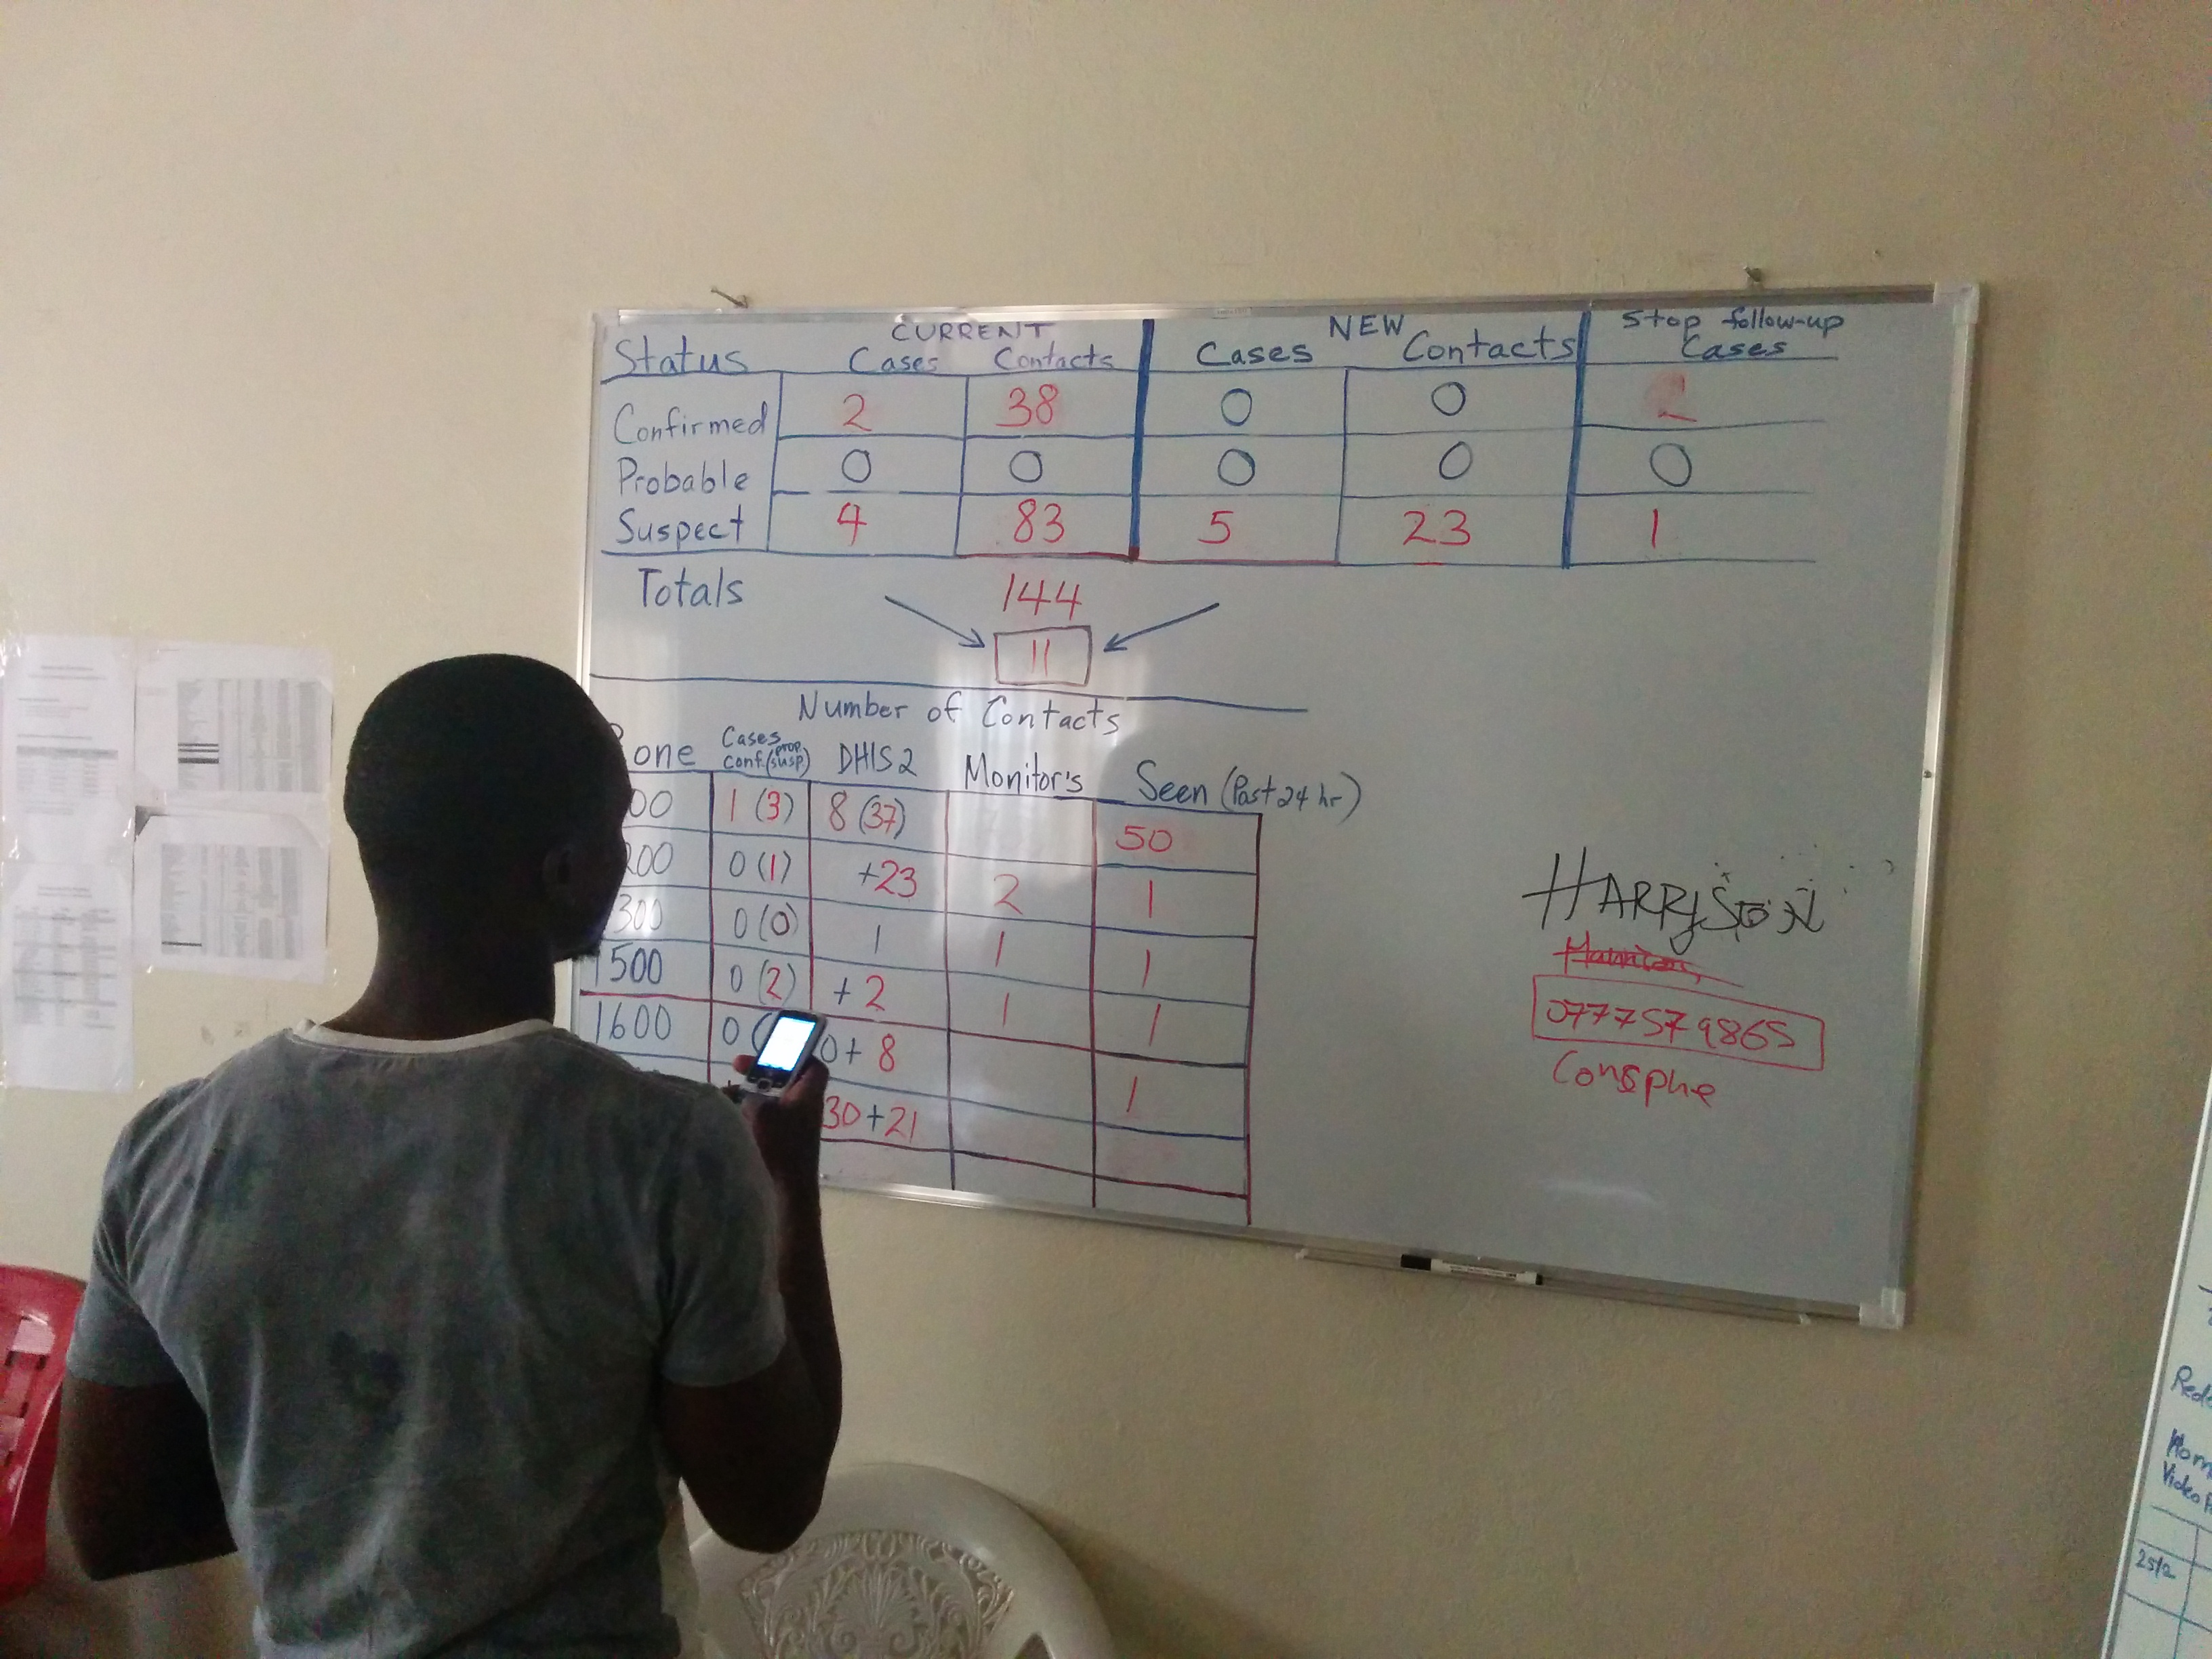 Vargo Degbe, from the Monrovia Ebola task force, tallies the day's case data